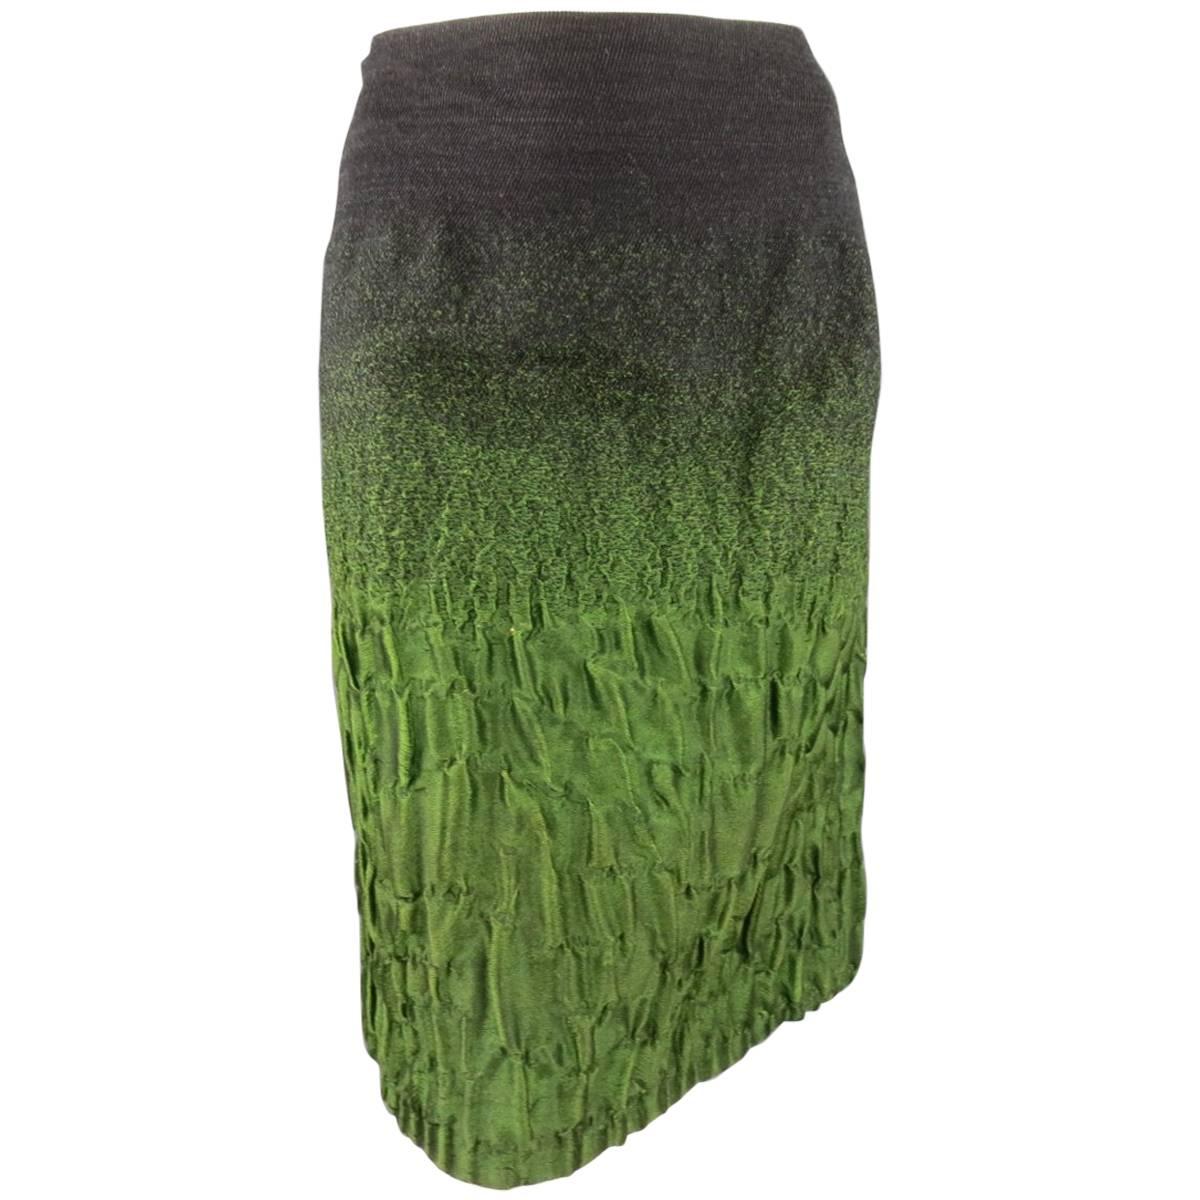 PRADA Size 10 Charcoal & Green Ombre Gradient Textured Fall 2007 Skirt